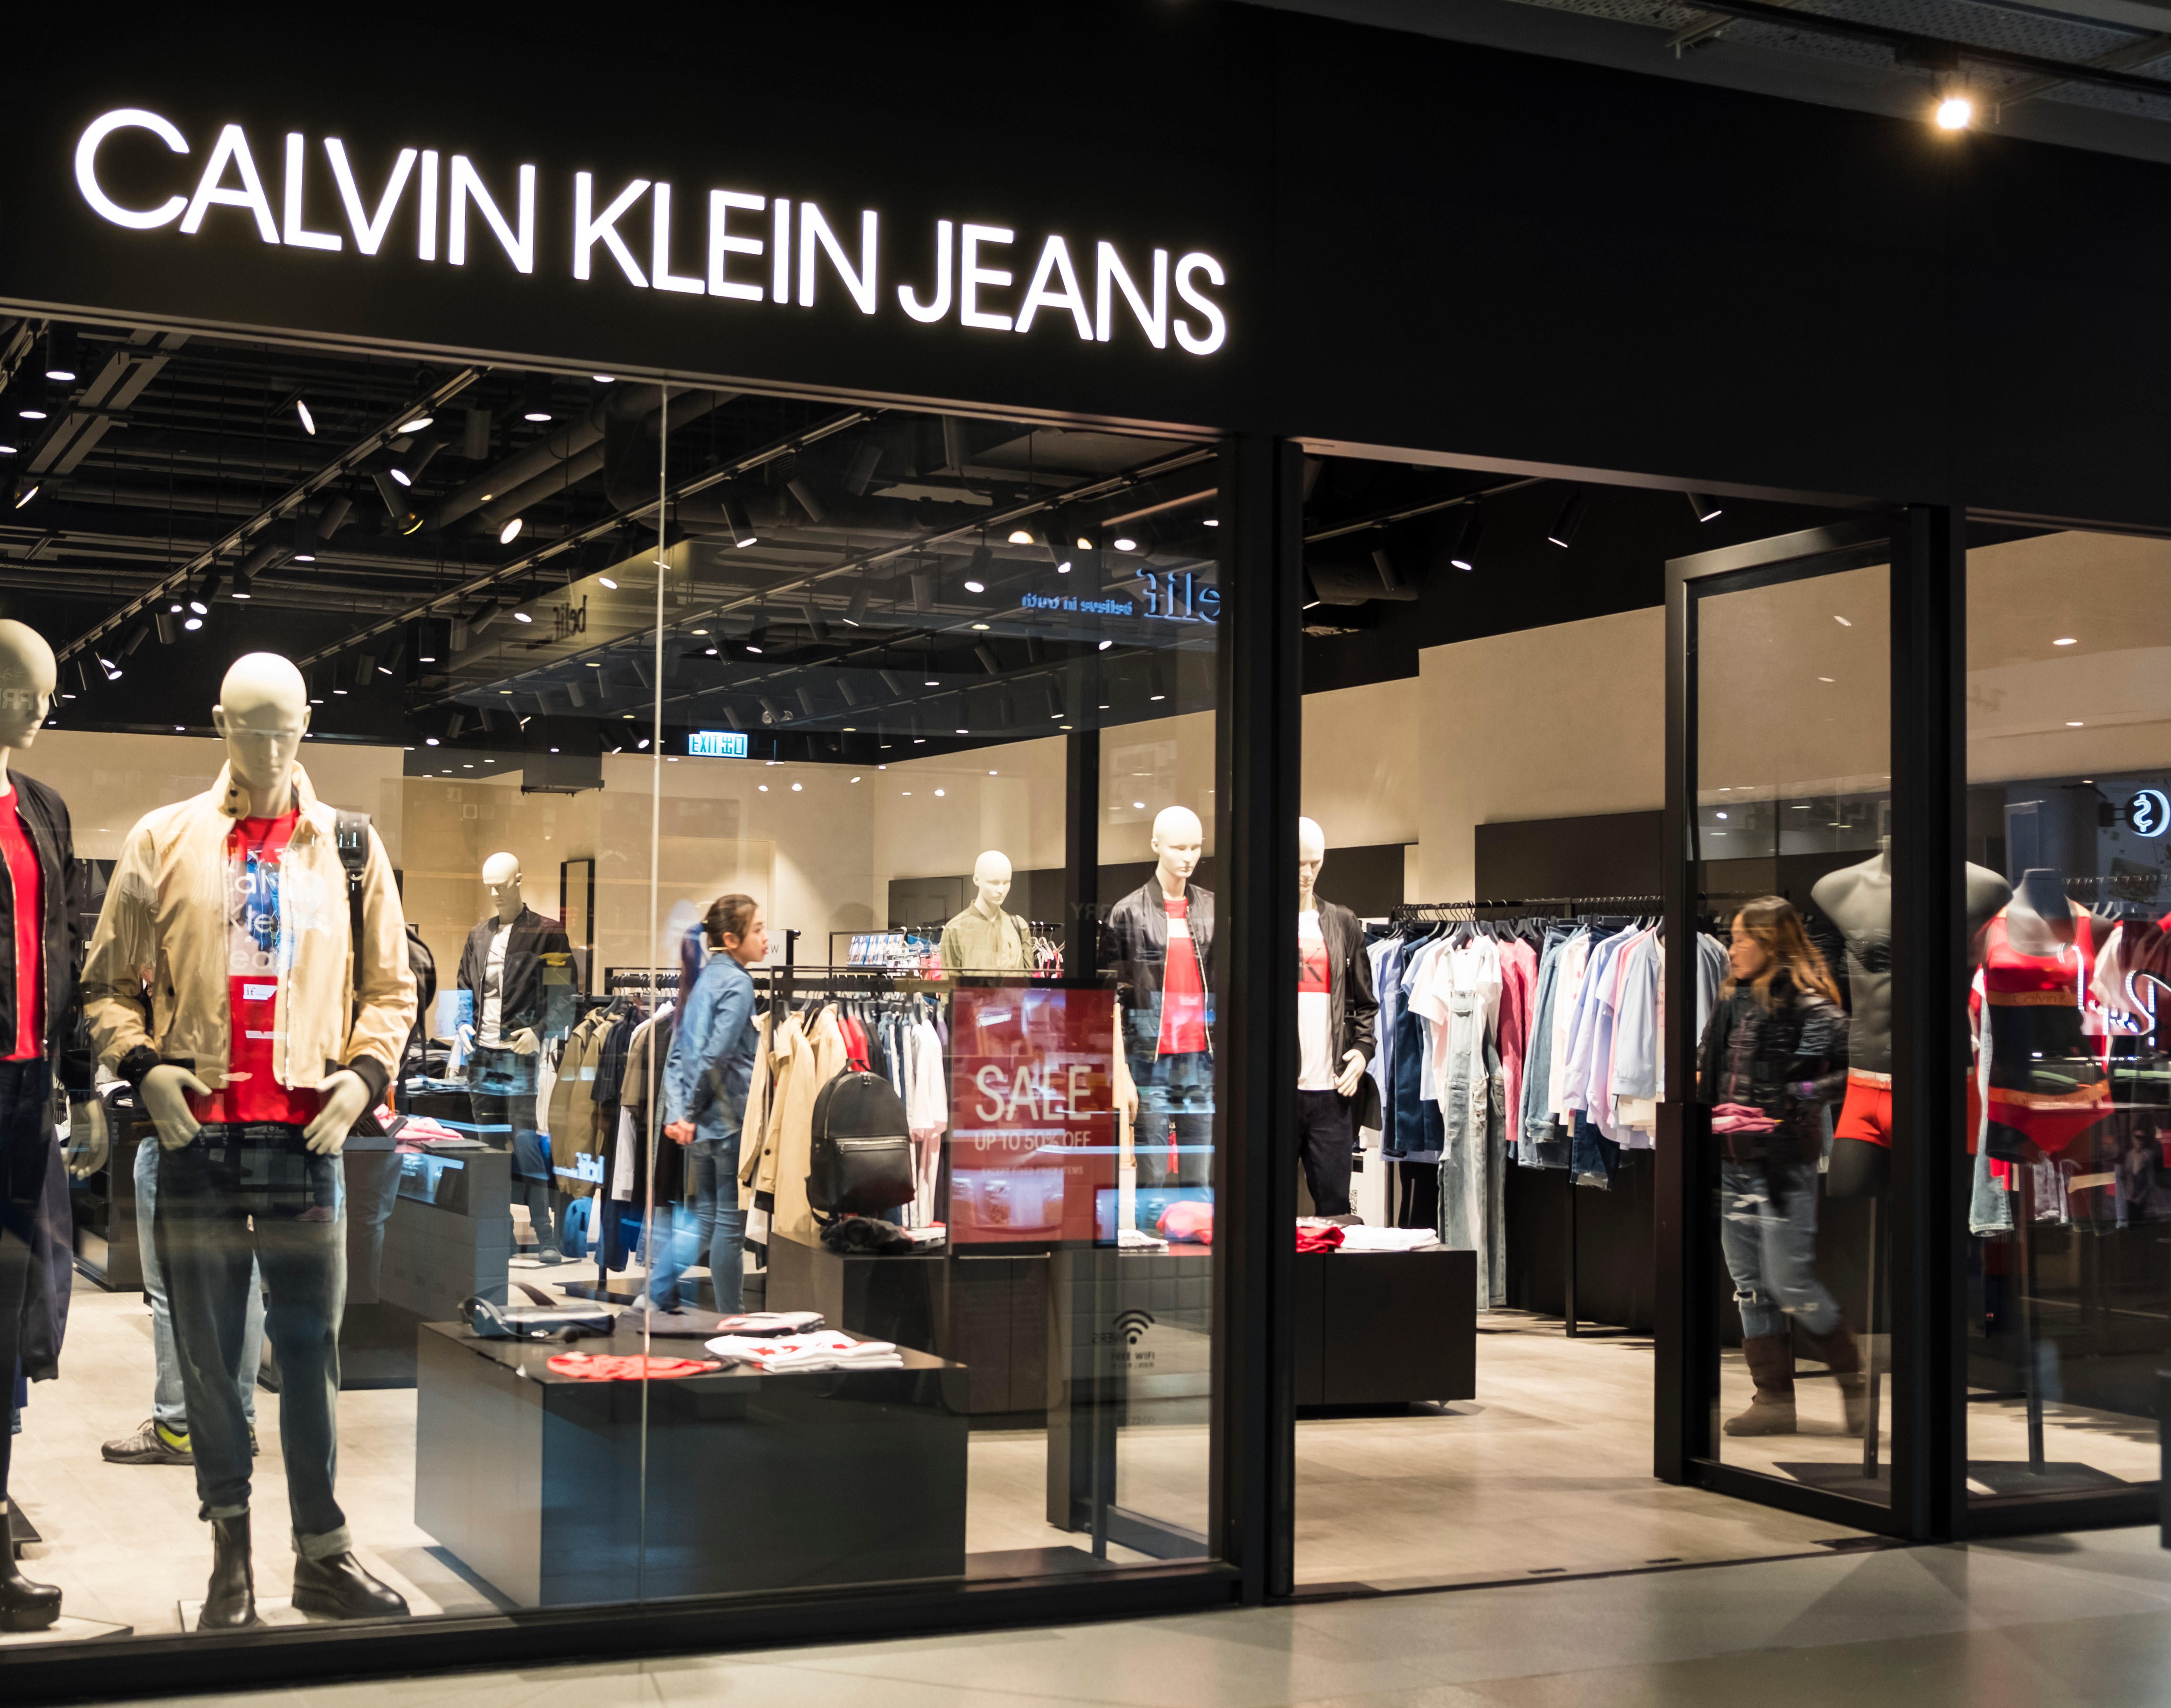 Hong Kong fashion company Global Brands Group is the official licensee of Calvin Klein. Photo: Alamy